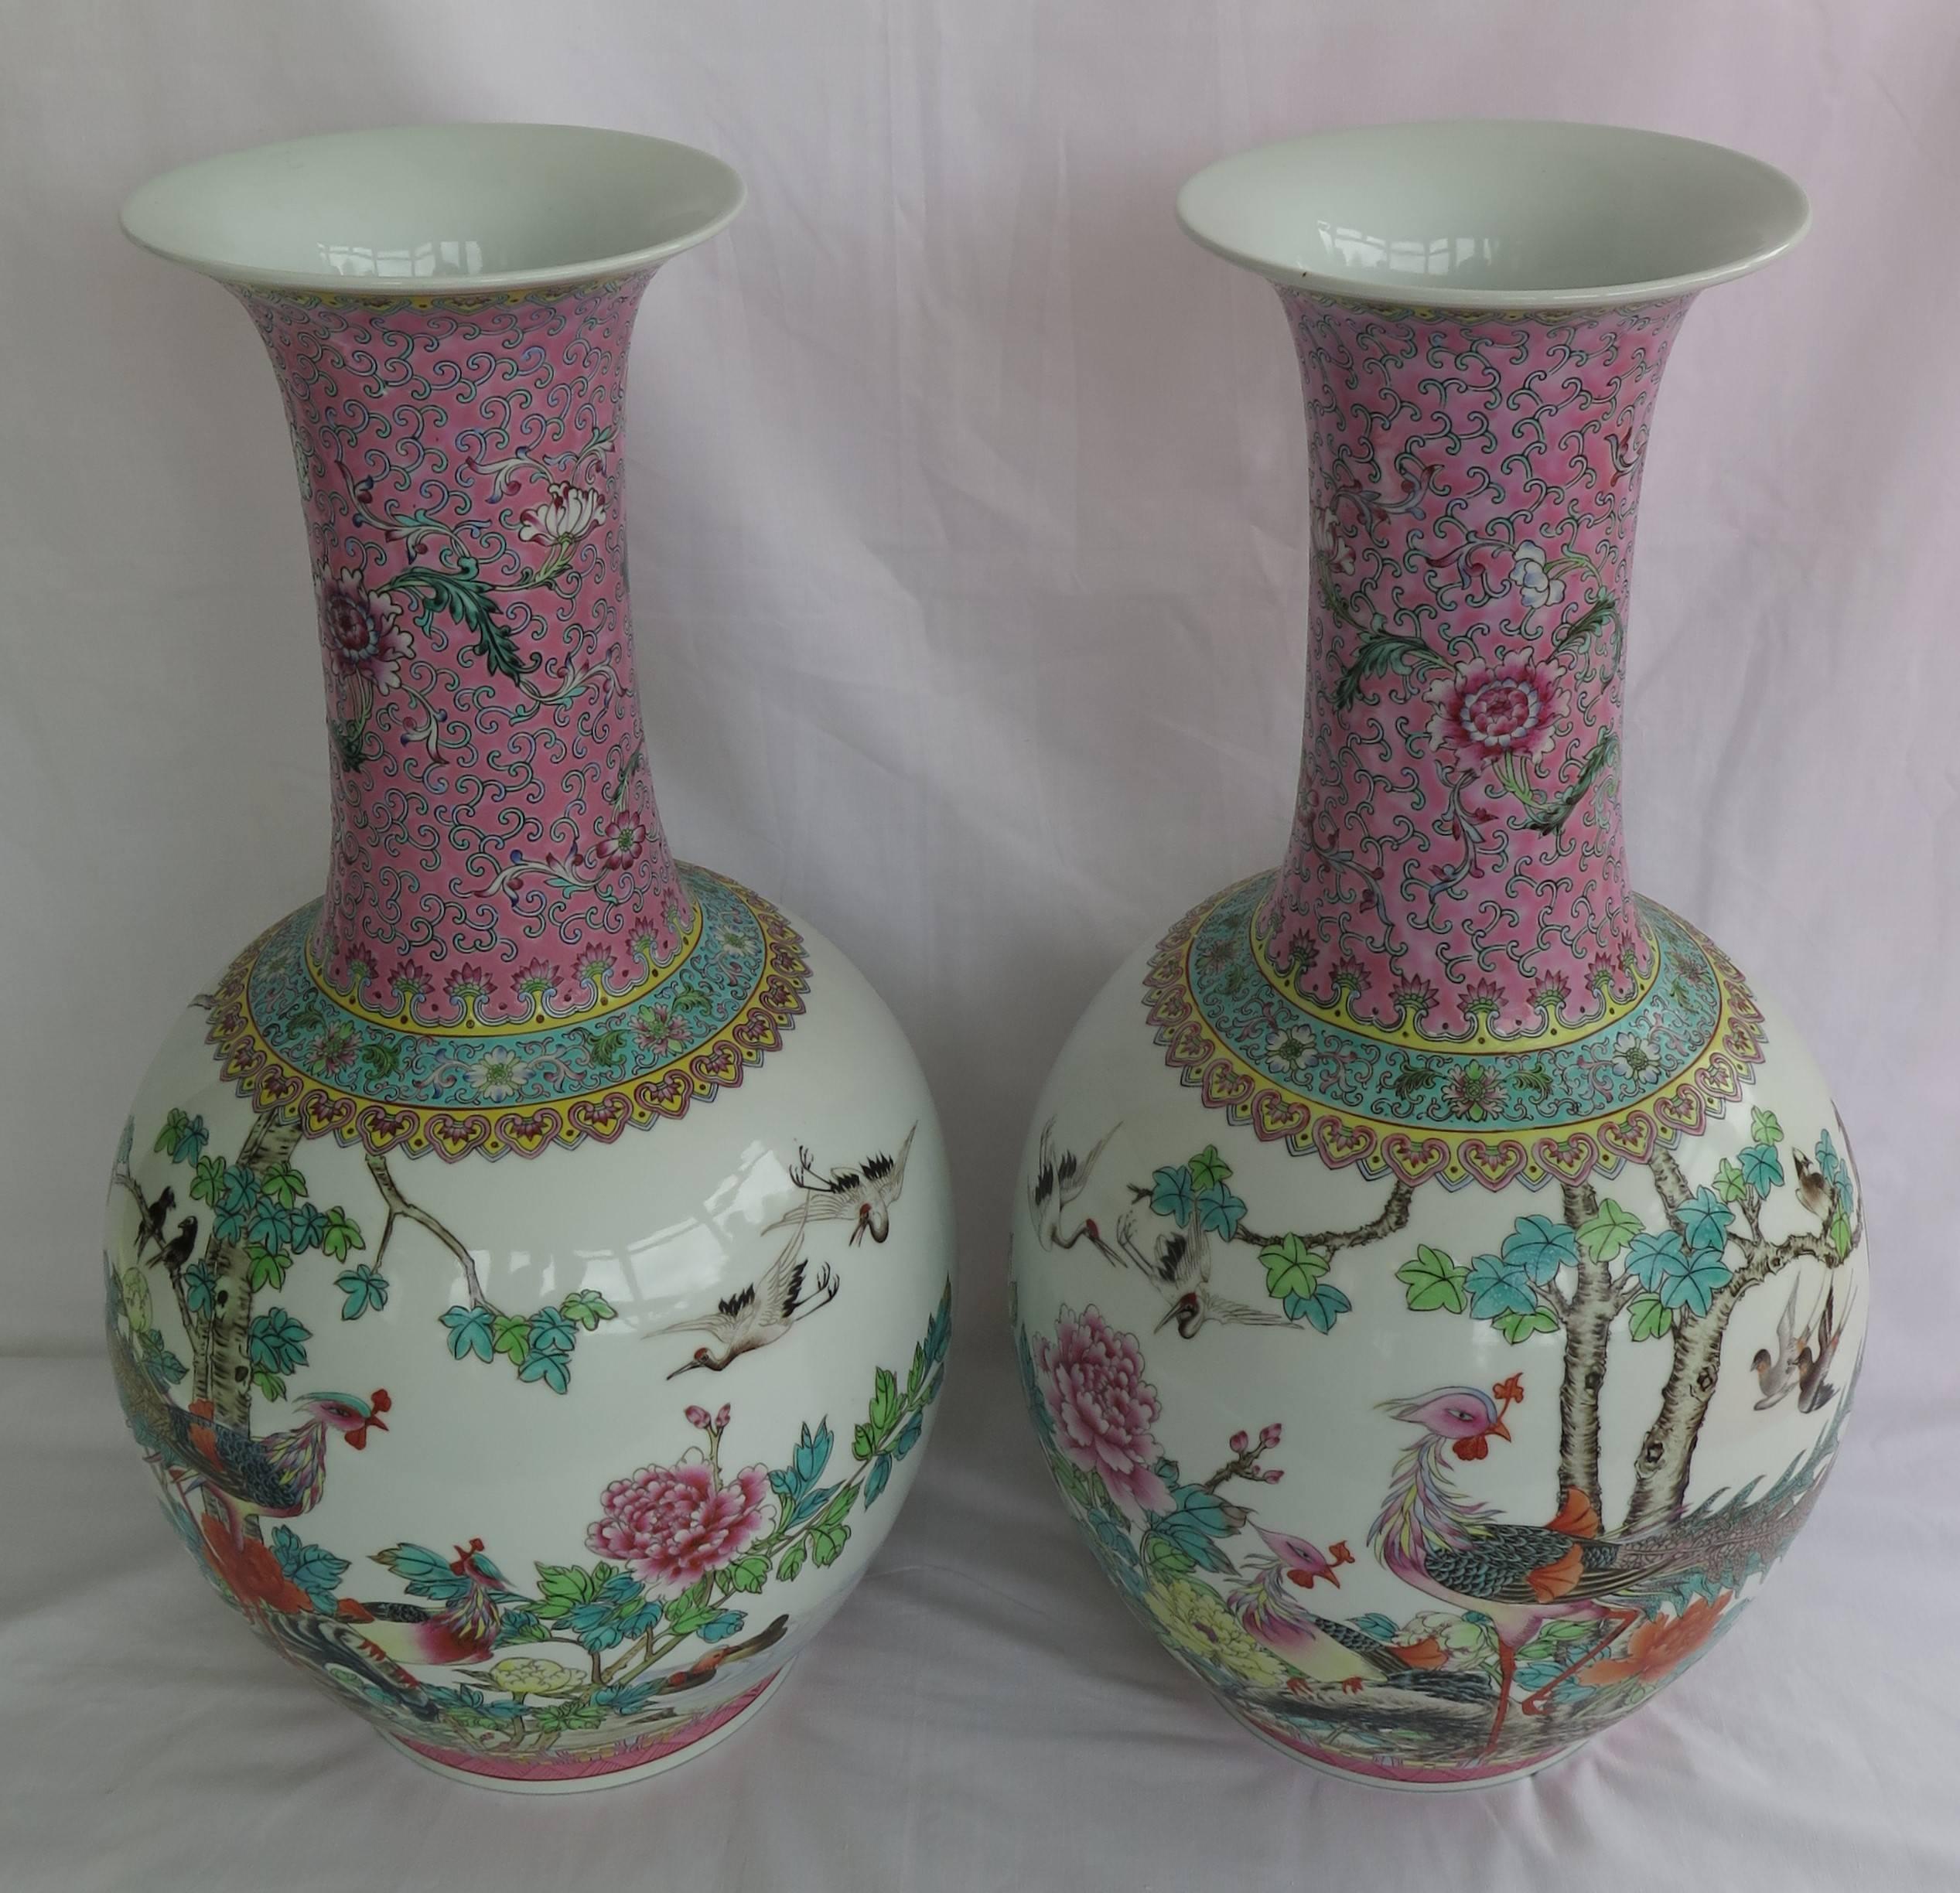 These are a very decorative and beautifully hand painted pair of Chinese Export porcelain vases dating to the mid-20th century.

Each vase has an ovoid bottle form leading to a slender neck with a flared rim, producing a superb elegant shape. 
